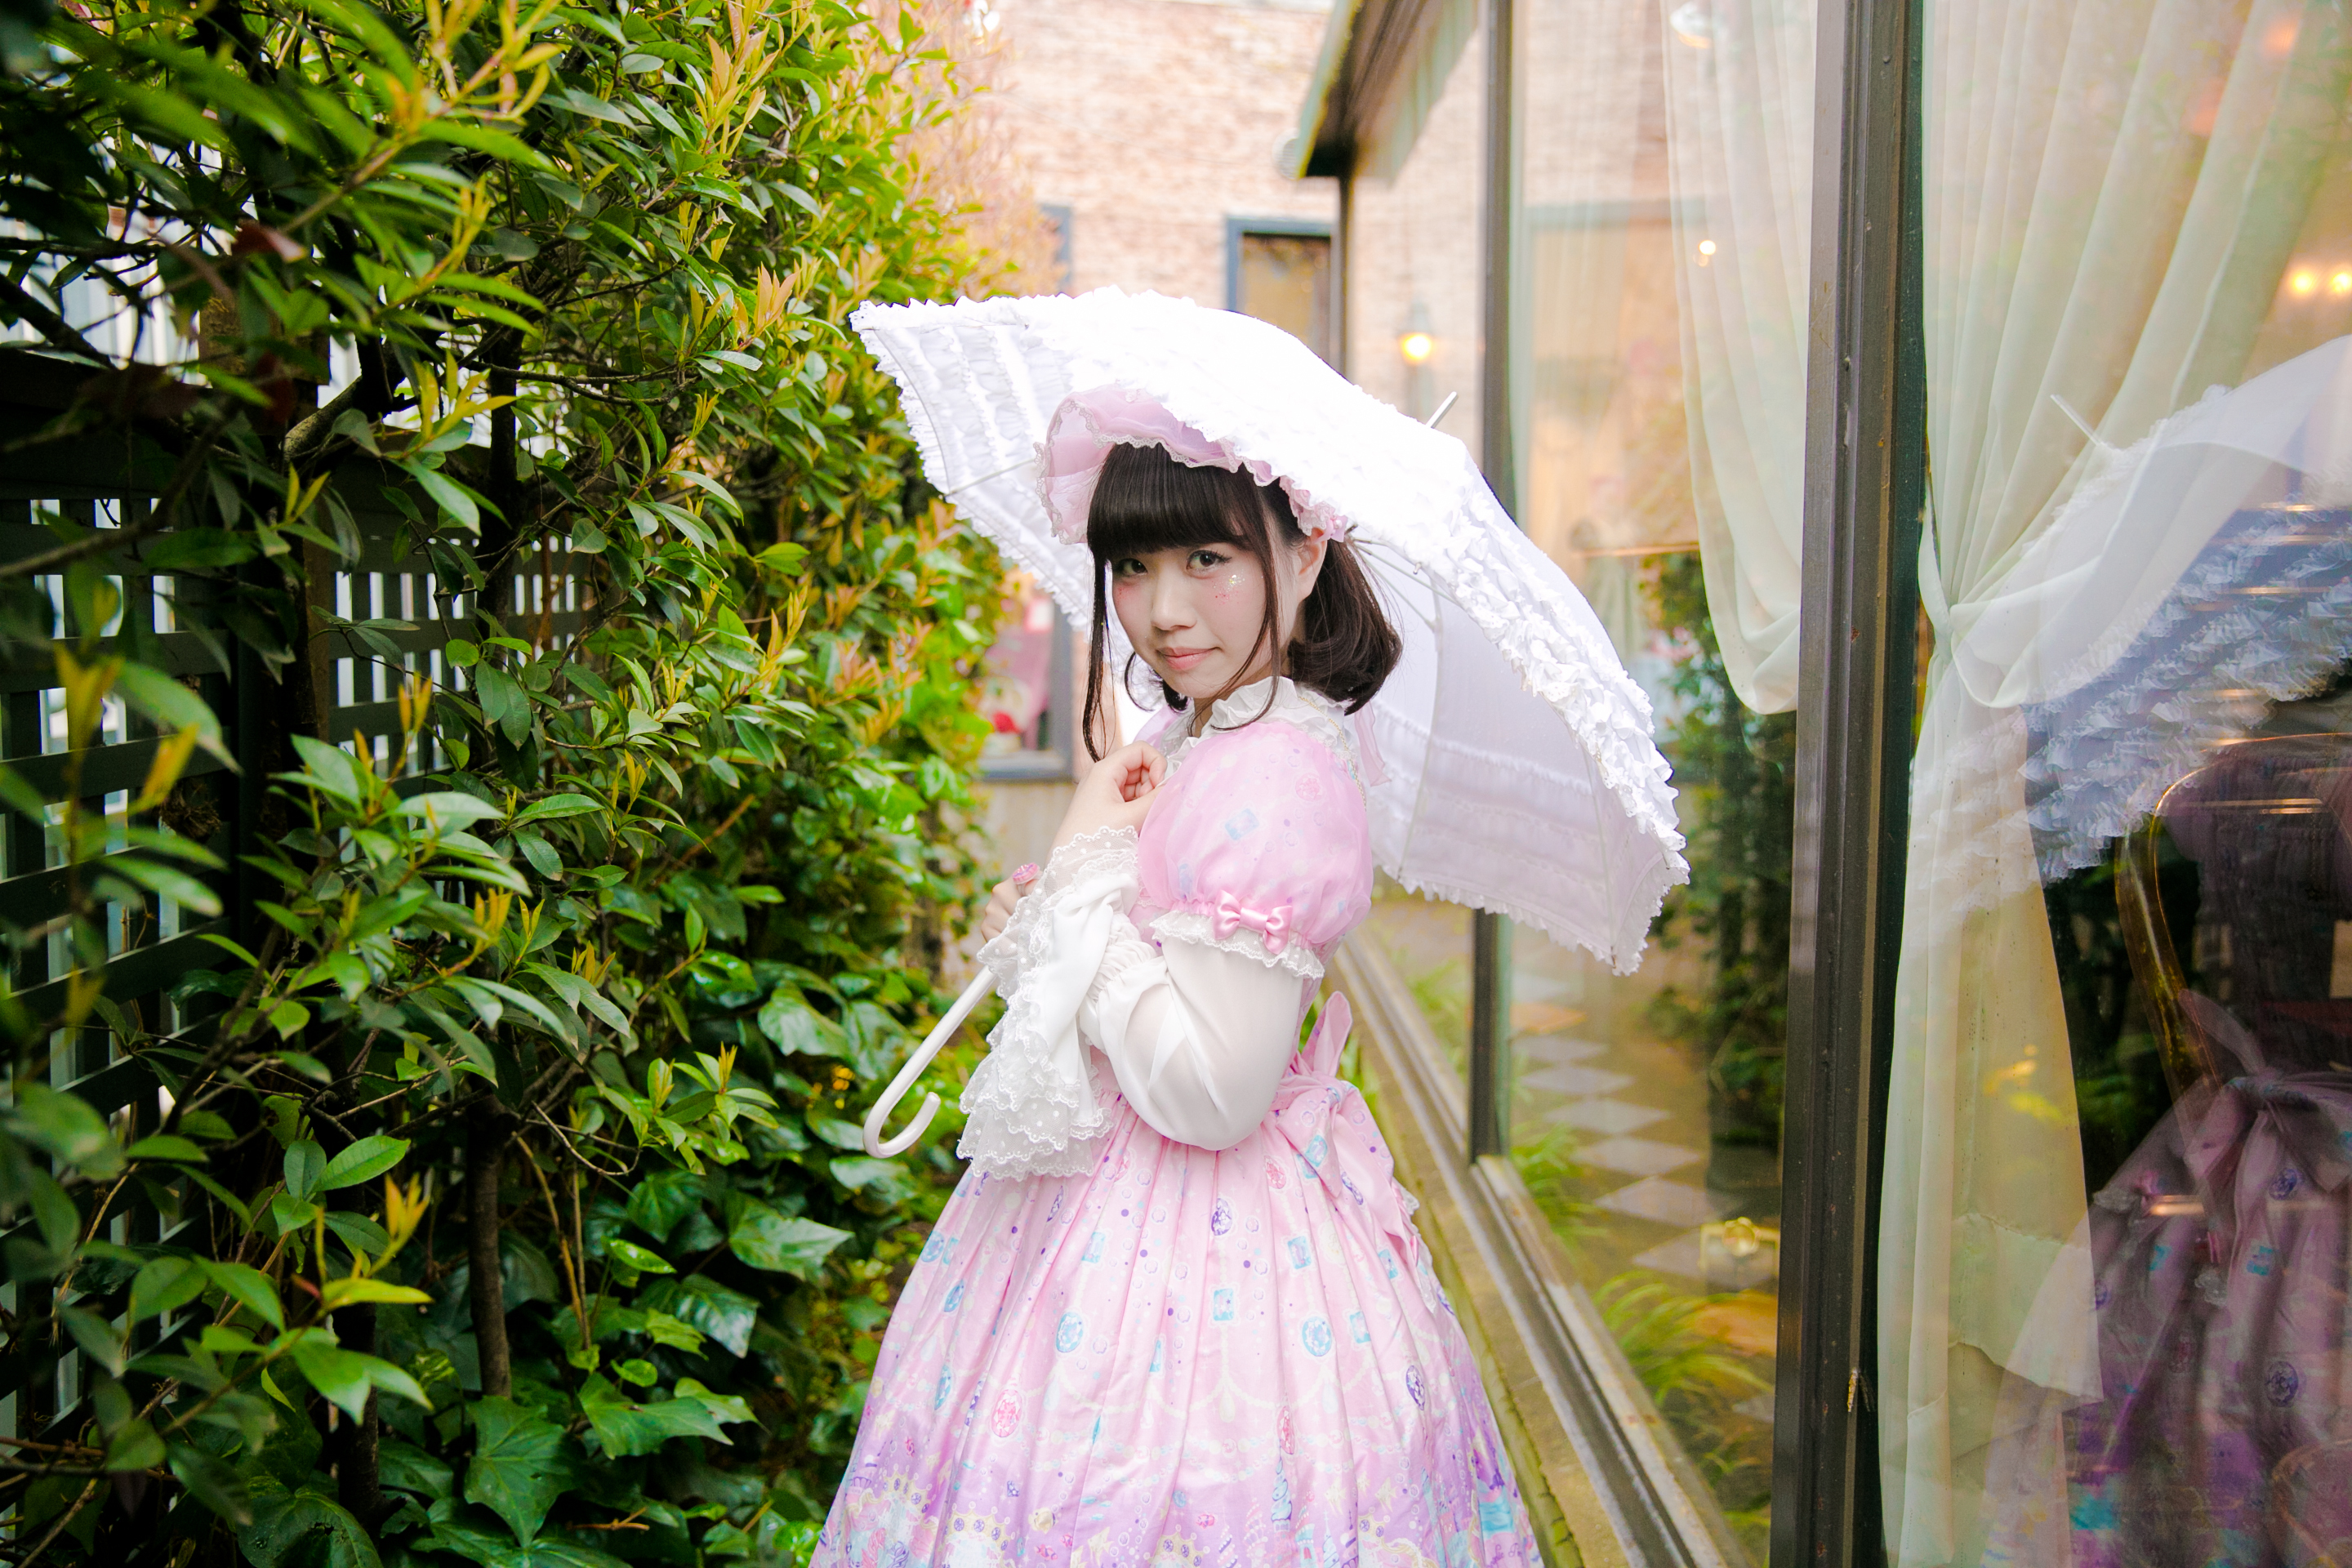 How to Get Casual Lolita from Japan